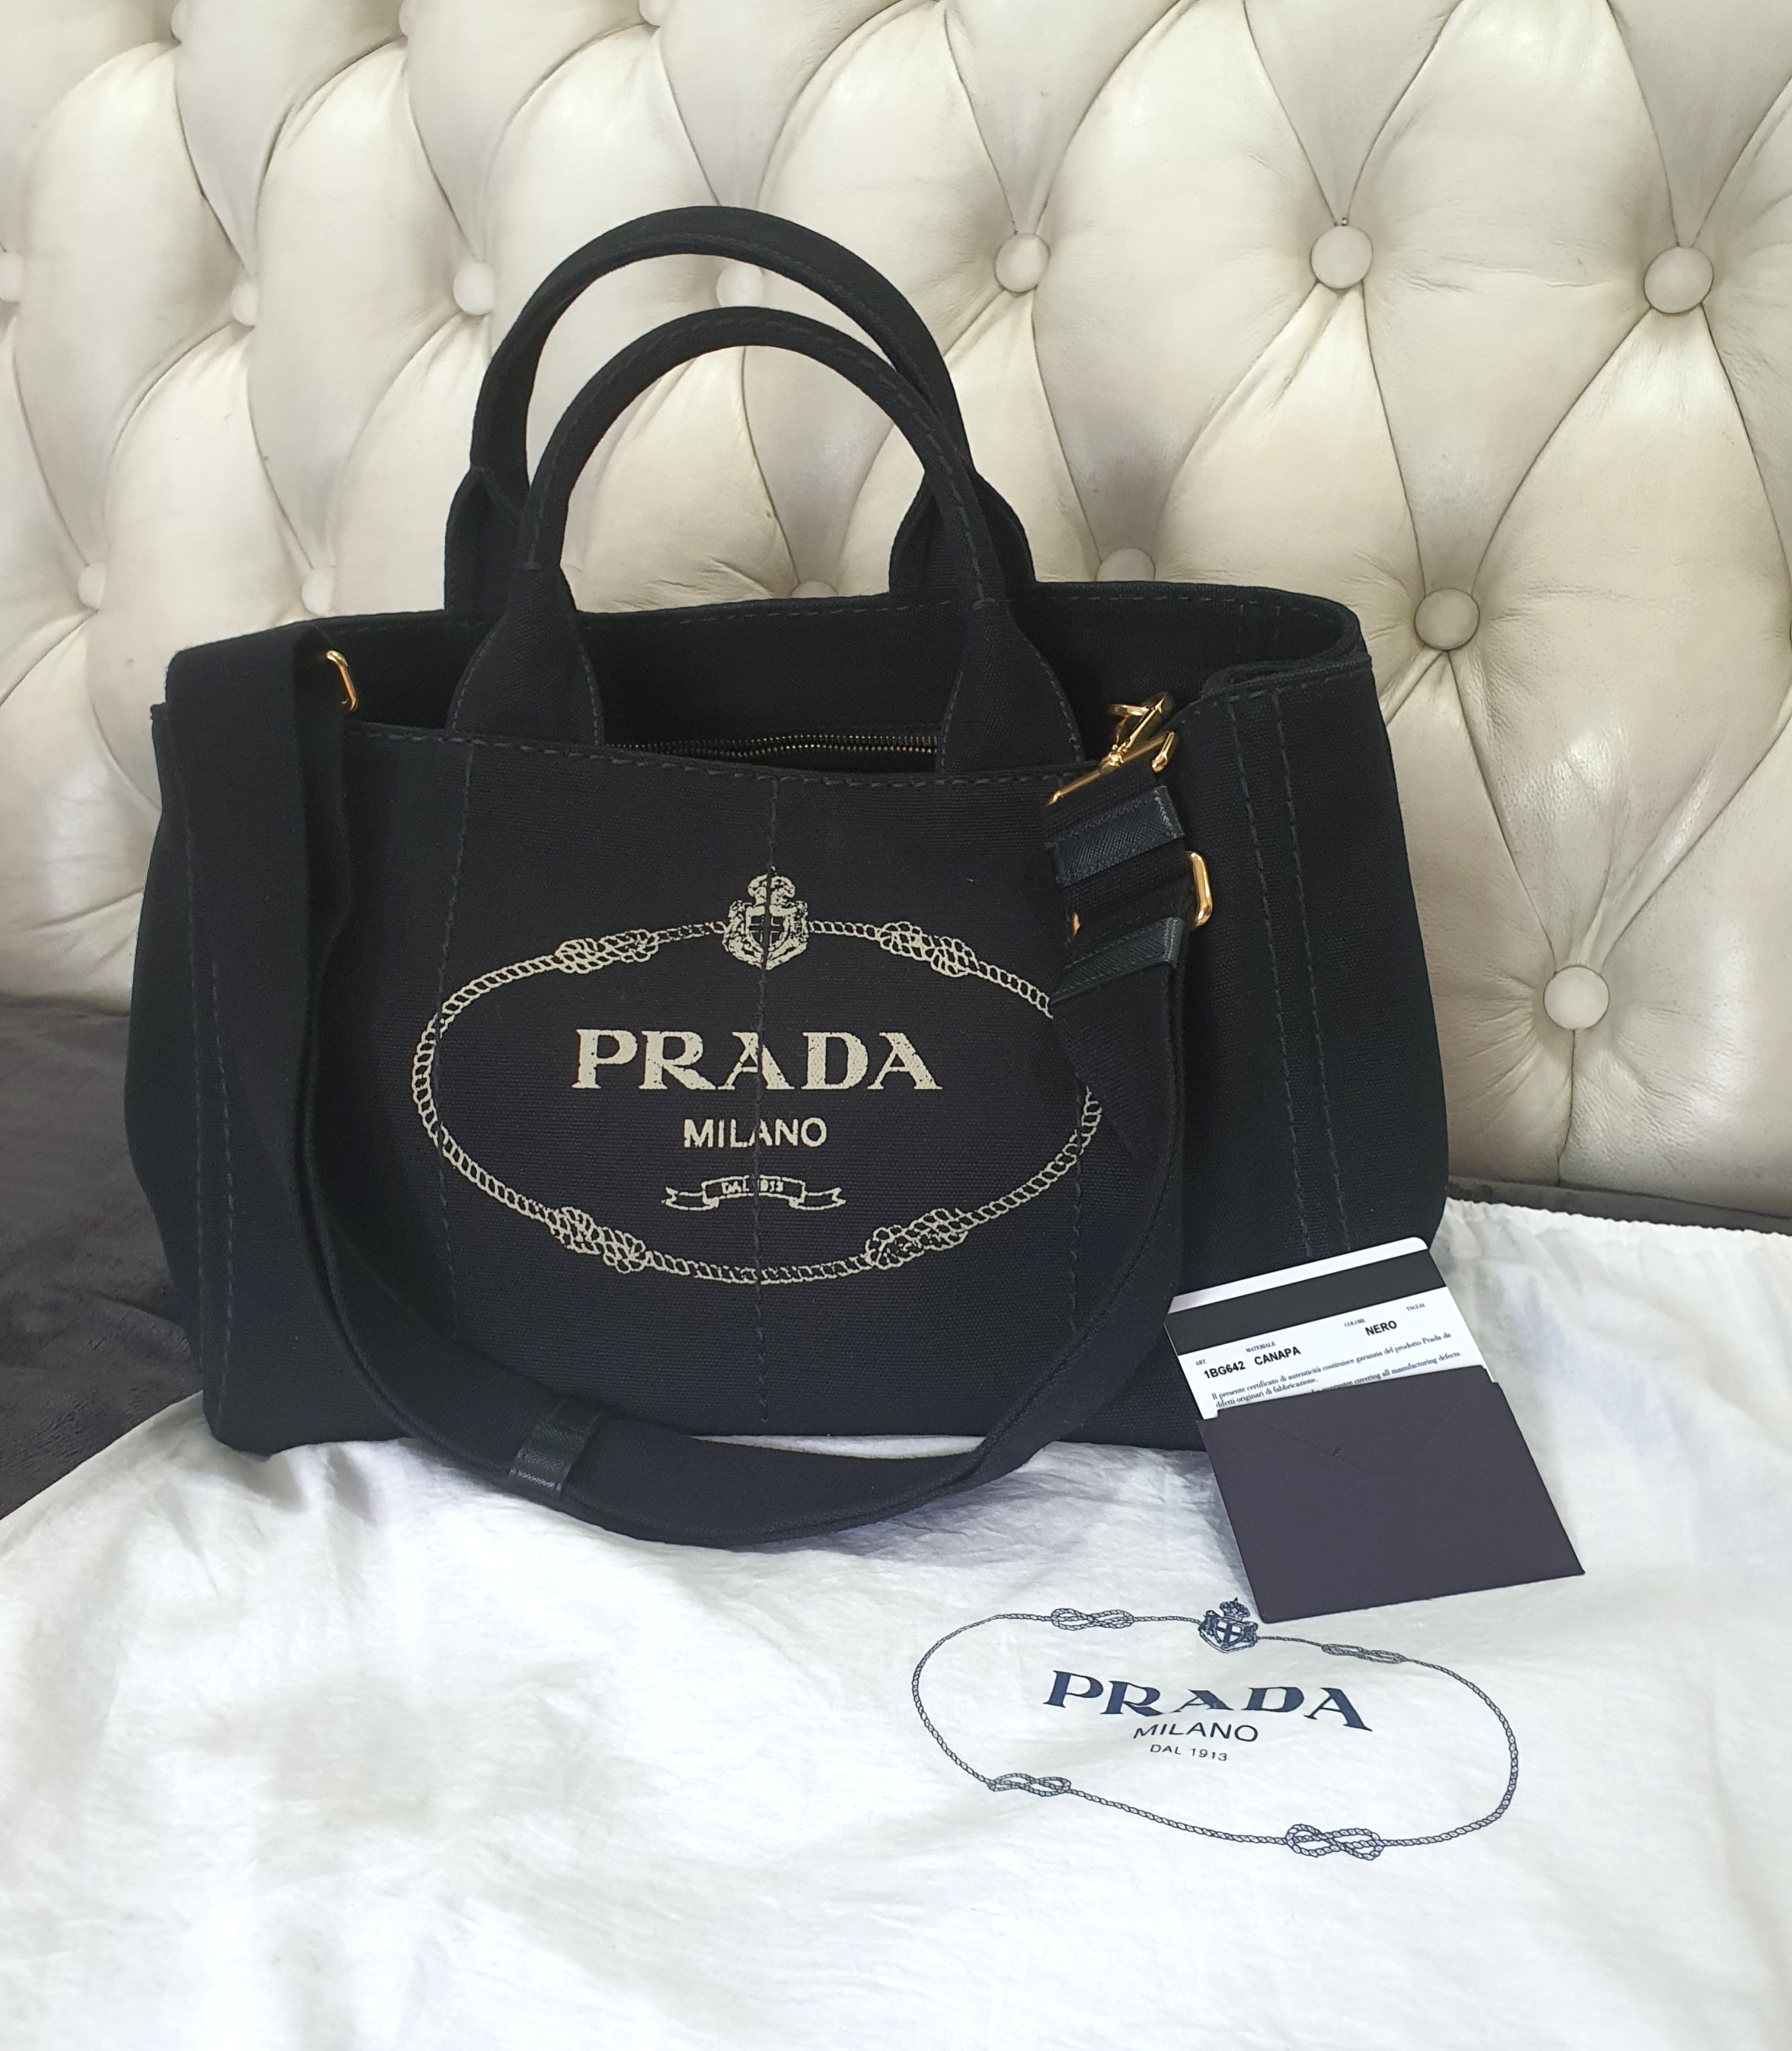 ❌SOLD❌Prada Canapa Black Canvas Tote Bag with Gold Hardware